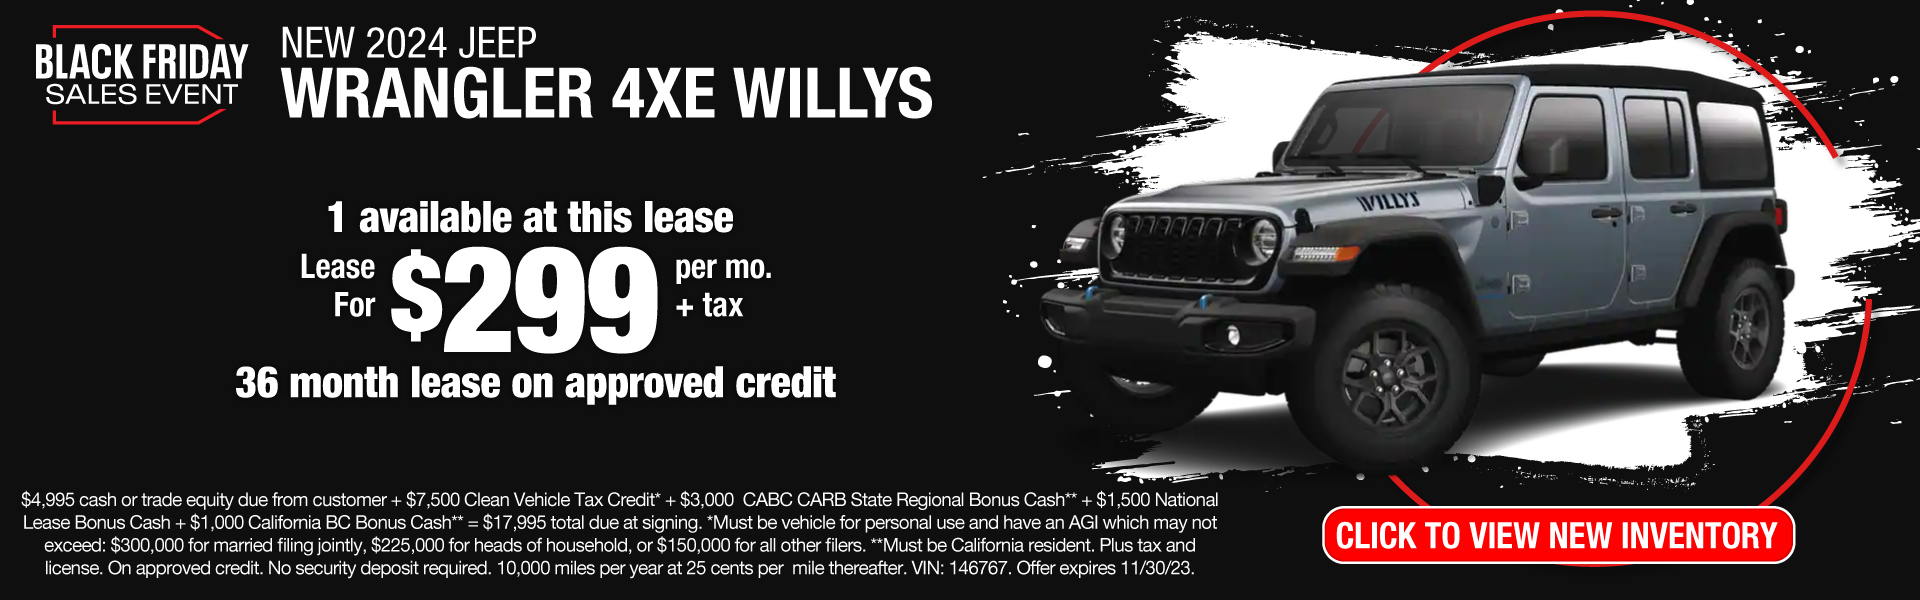 Lease a New 2024 Jeep Wrangler 4xe Willys for $299 per month. Offer expires 11/30/23.